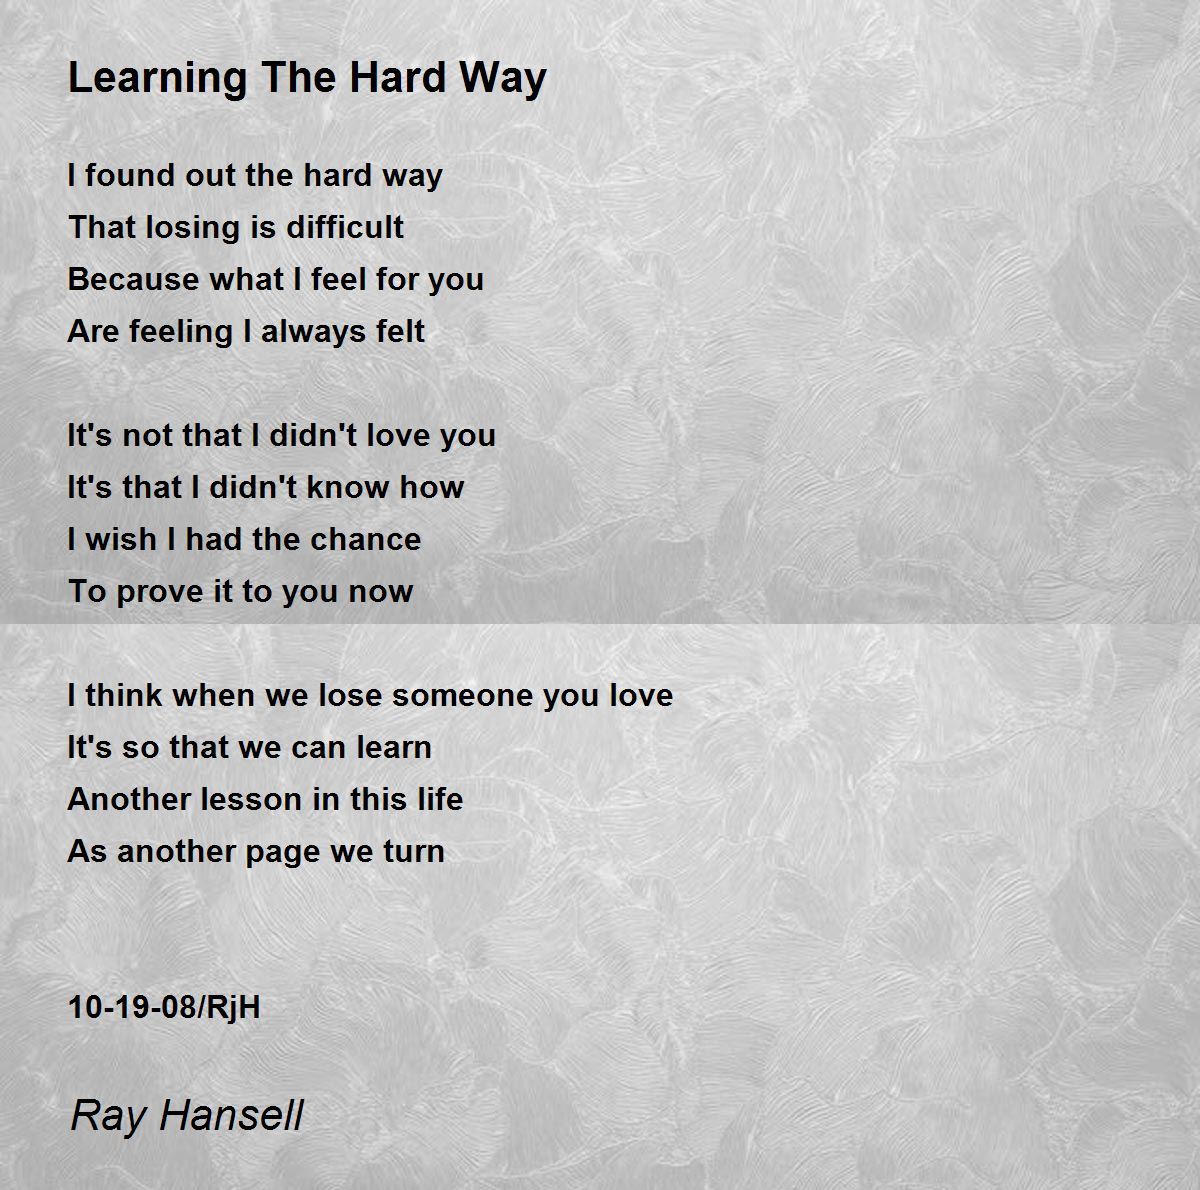 Learning The Hard Way - Learning The Hard Way Poem by Ray Hansell